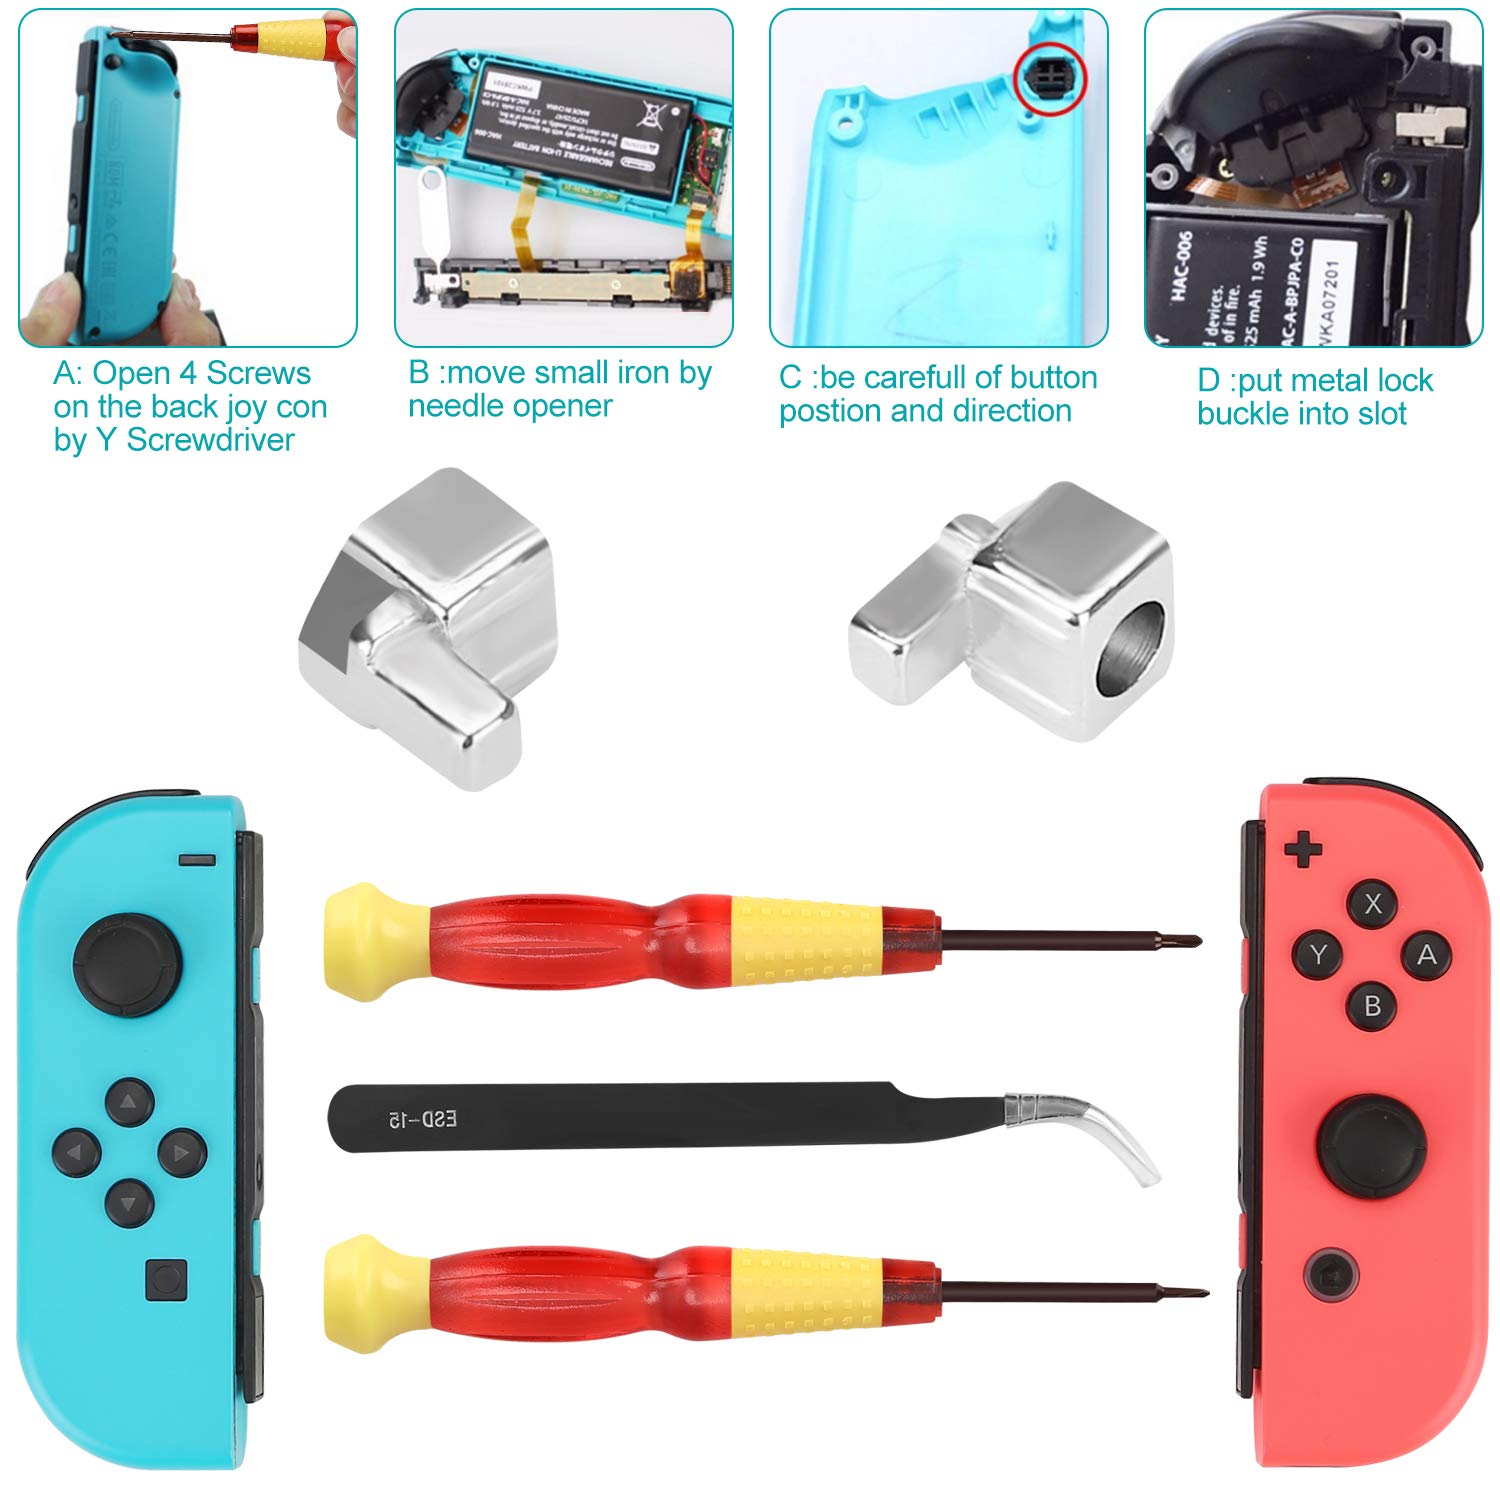 Veperain 2 Pack of 3D Analog Joystick Replacement for Nintendo Switch Joy Con Controller and Switch OLED Model, with Cross & Tri-Wing Screwdrivers, Repair Tool Kits for Nintendo Switch & Switch OLED